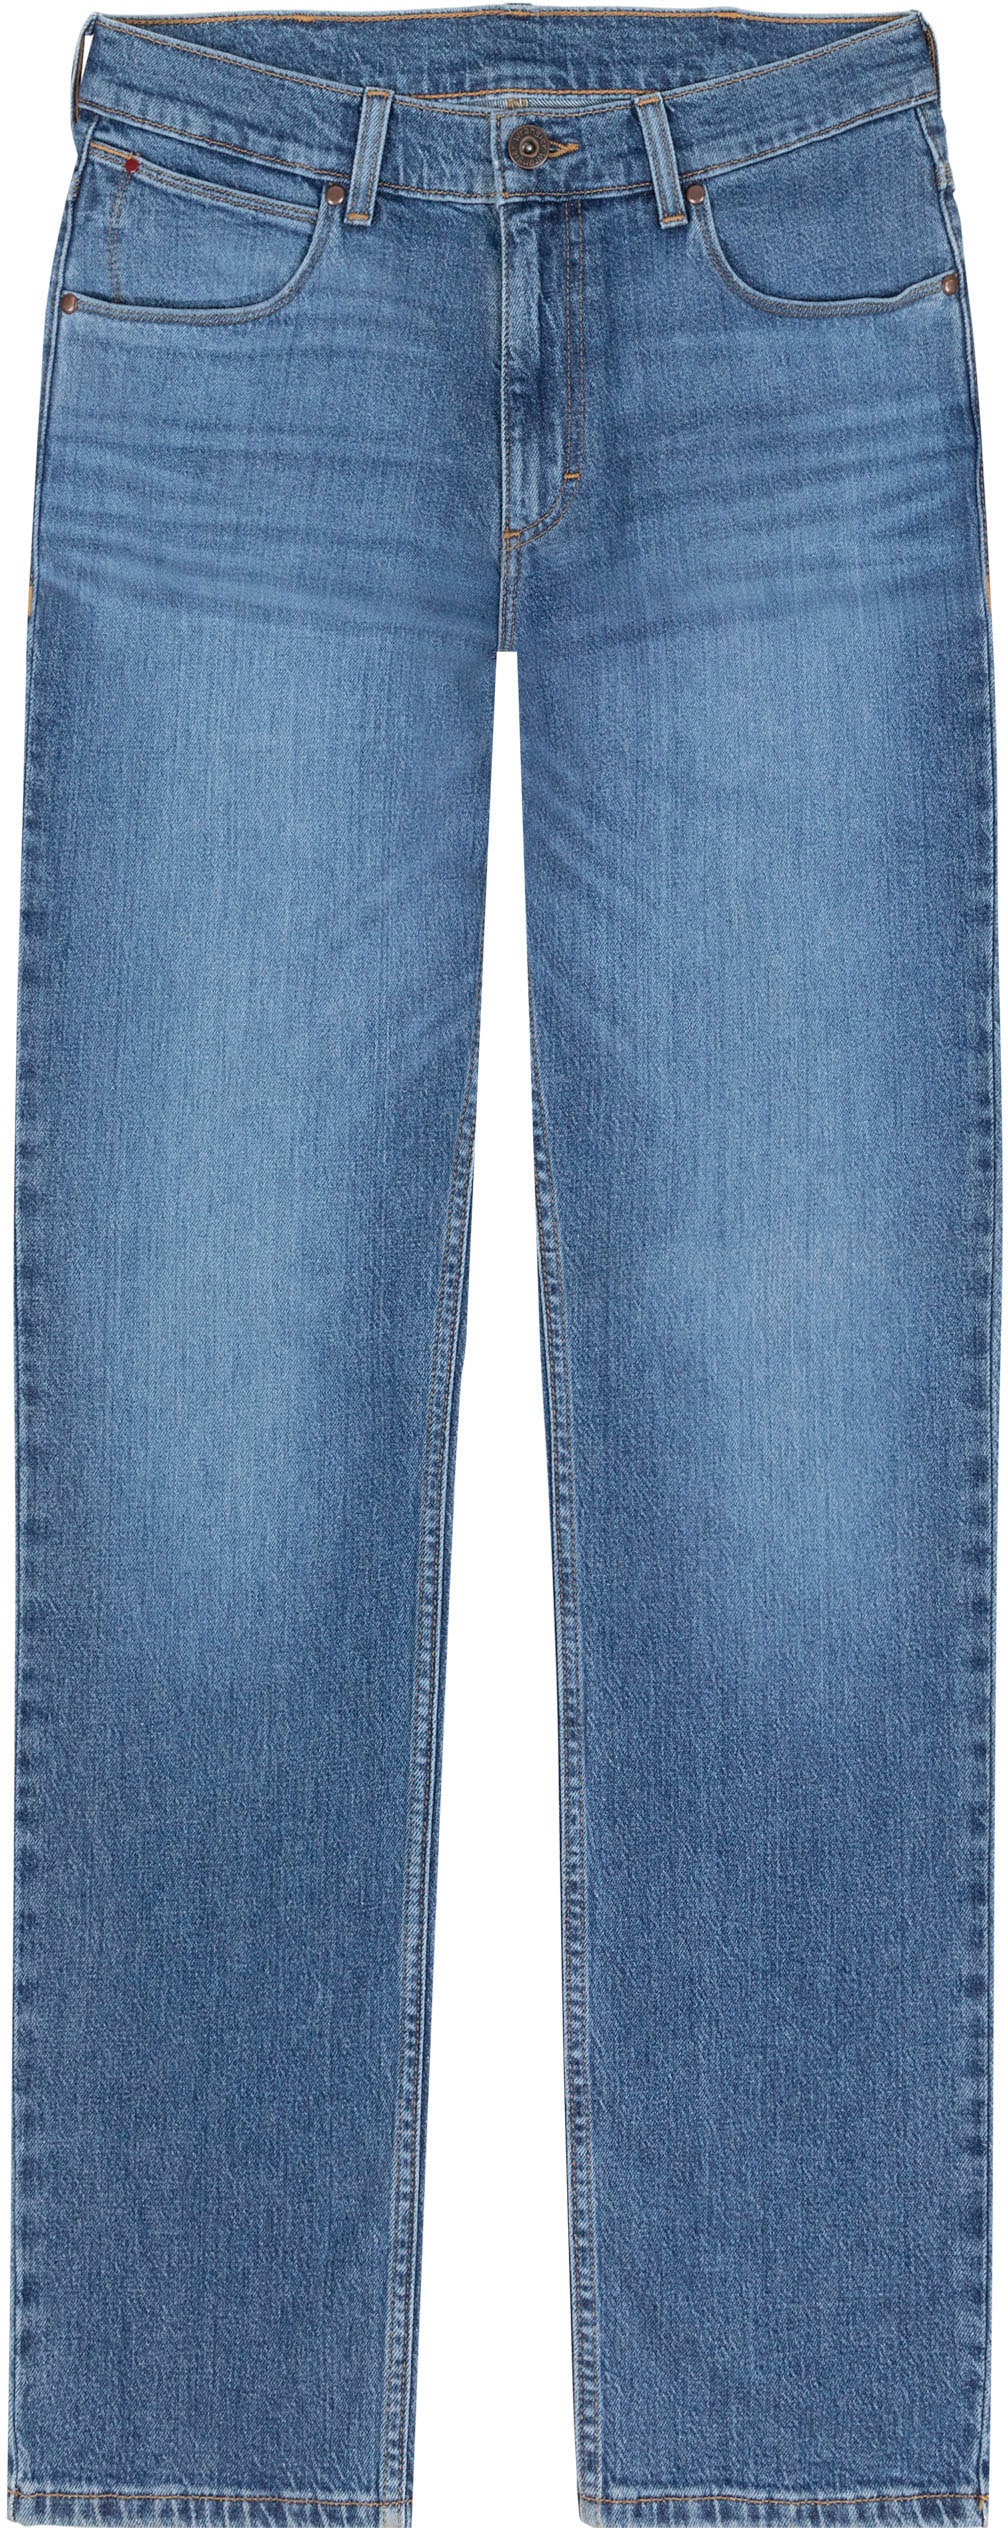 Straight-Jeans bequem »Authentic Straight« Wrangler kaufen